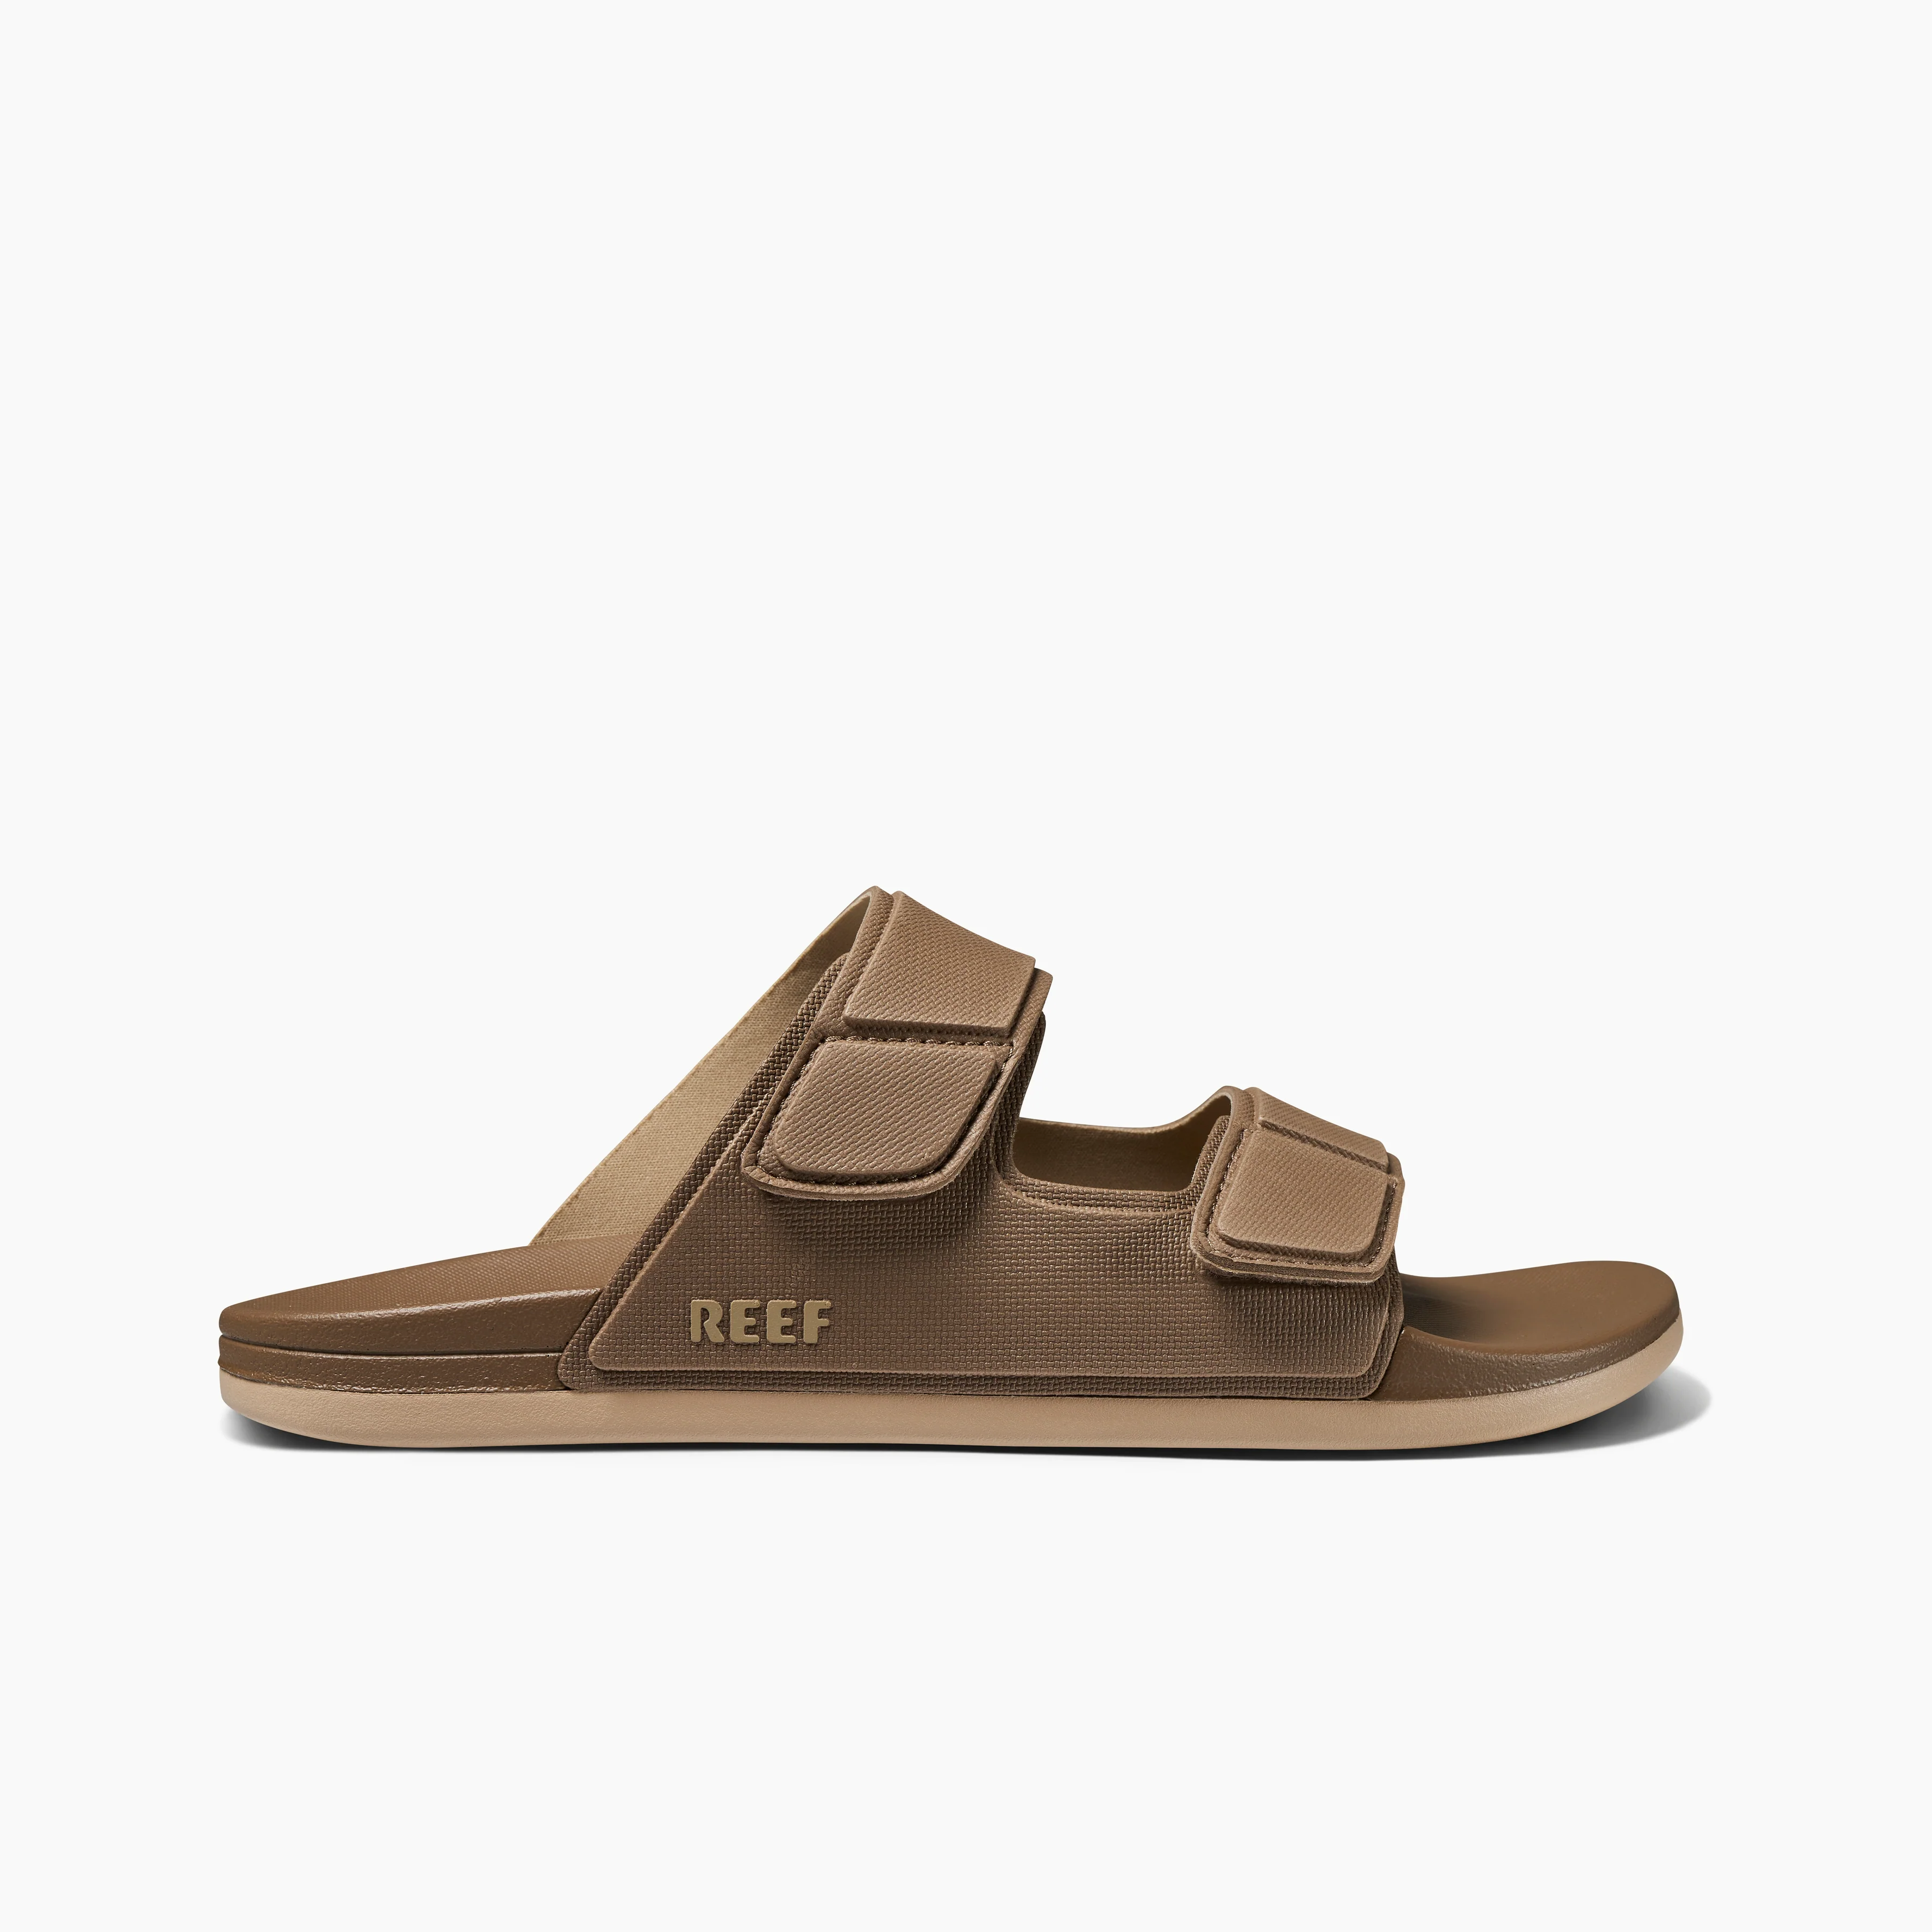 Men's Cushion Tradewind Vegan Leather Slides in Fossil side view